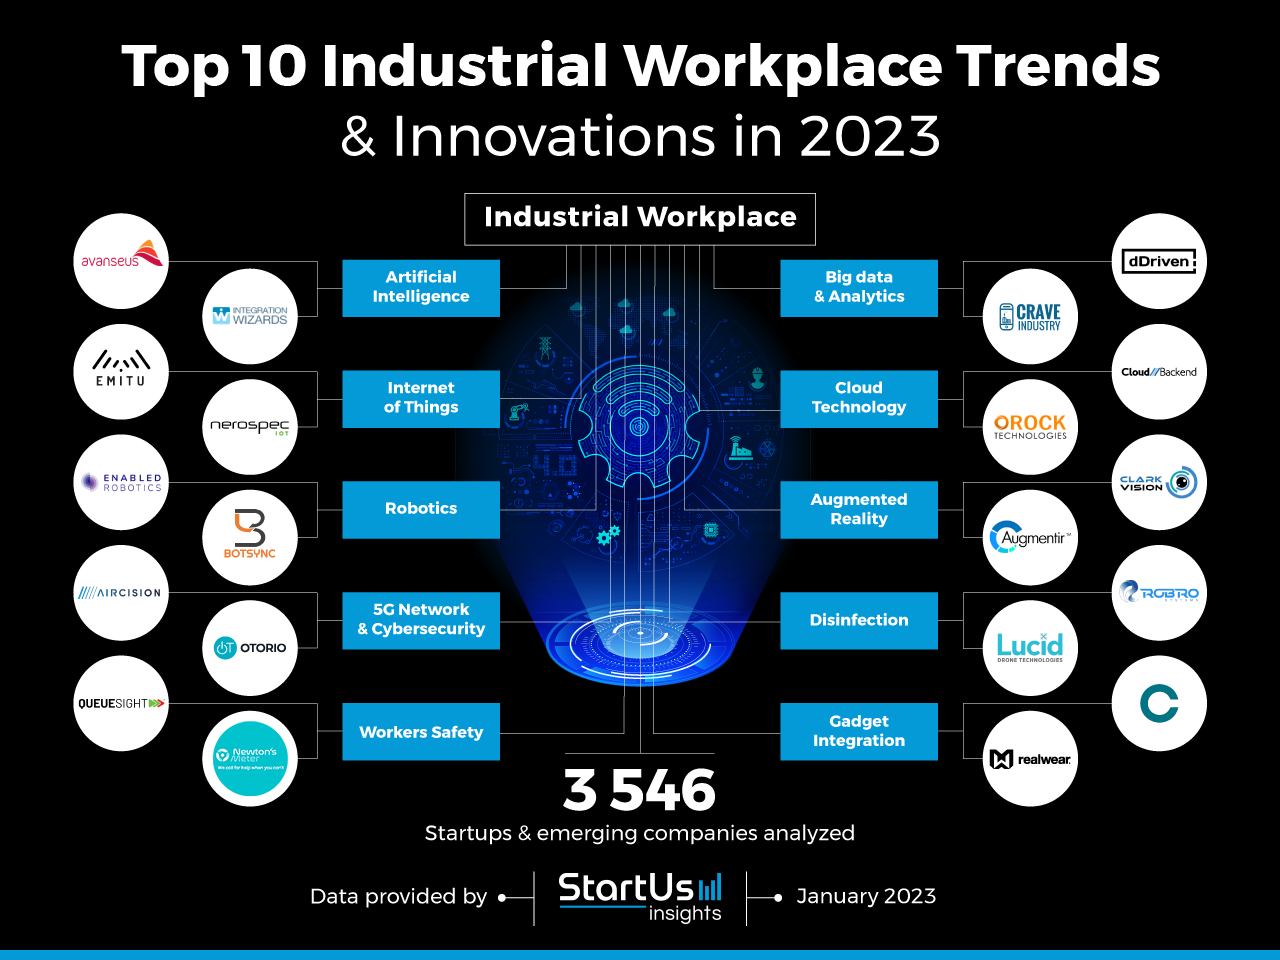 Industrial-Workplace-trends-Startups-TrendResearch-InnovationMap-StartUs-Insights-noresize